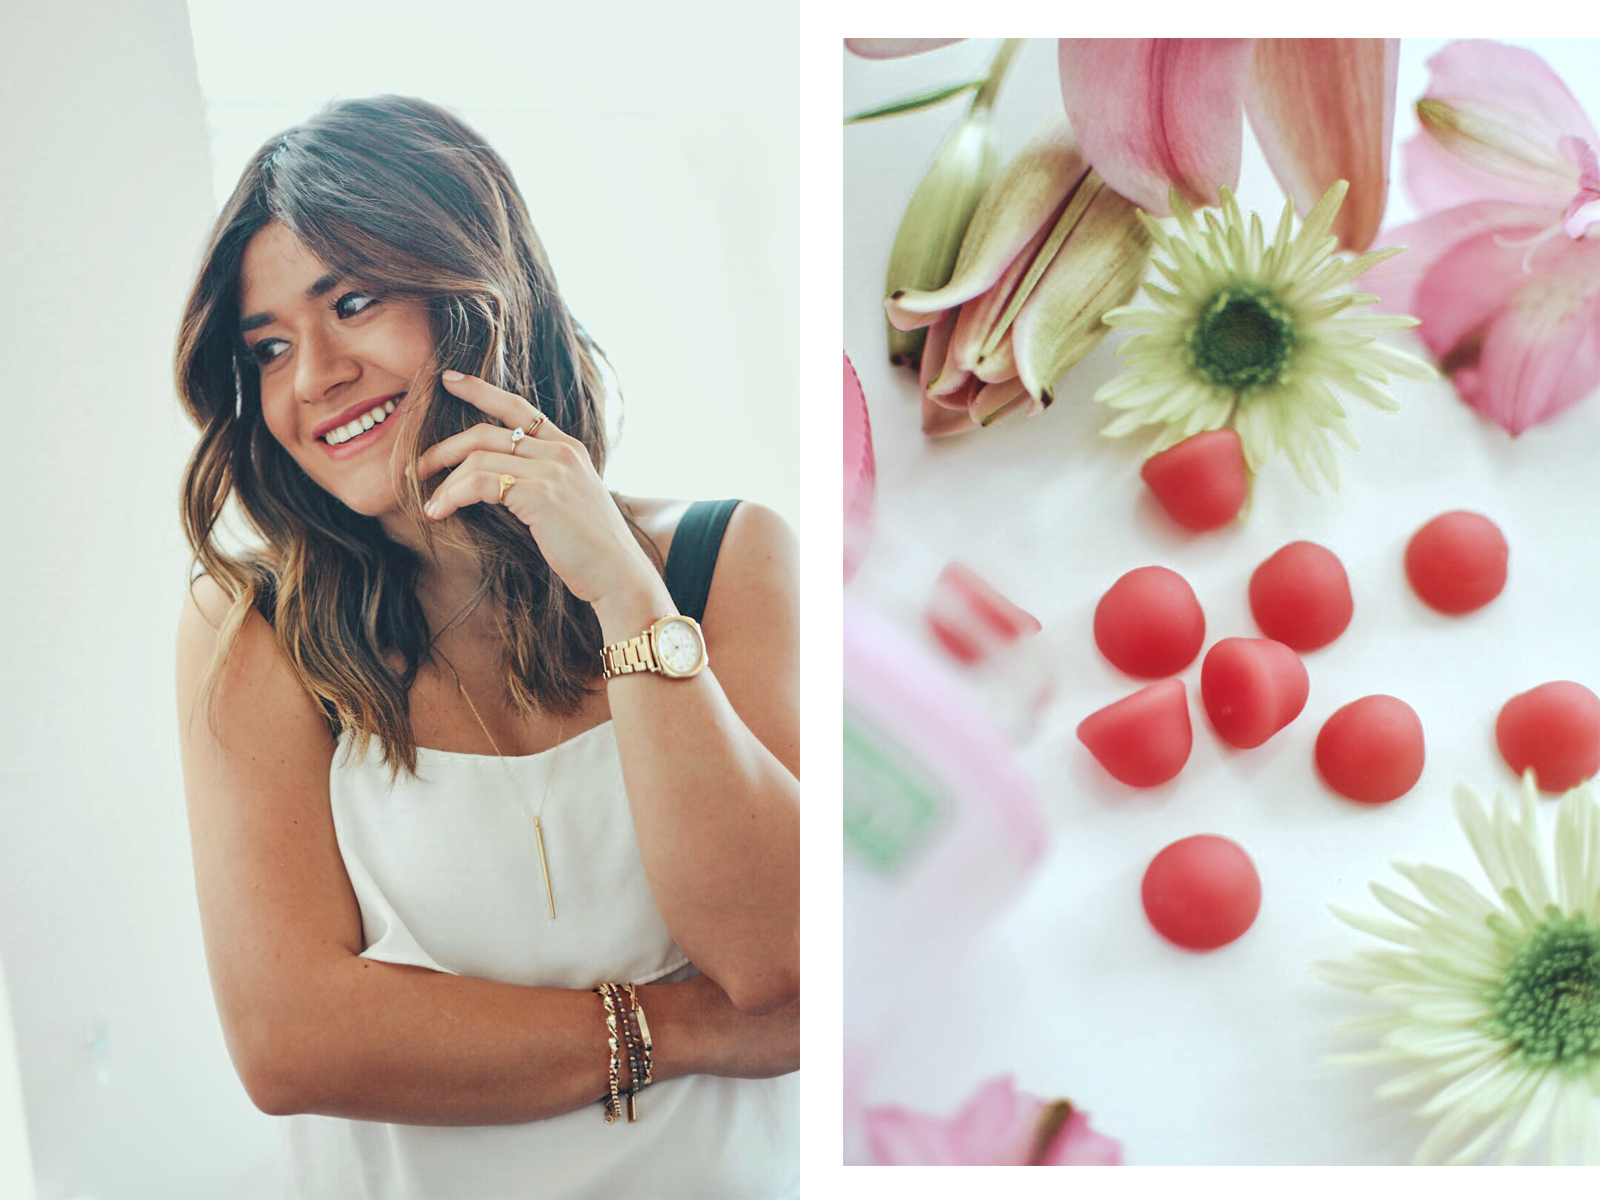 Carolina Hellal explains how to get festival ready with Nature's Bounty hair, skin & Nails gummies - HOW TO GET FESTIVAL READY by popular Denver style blogger Chic Talk